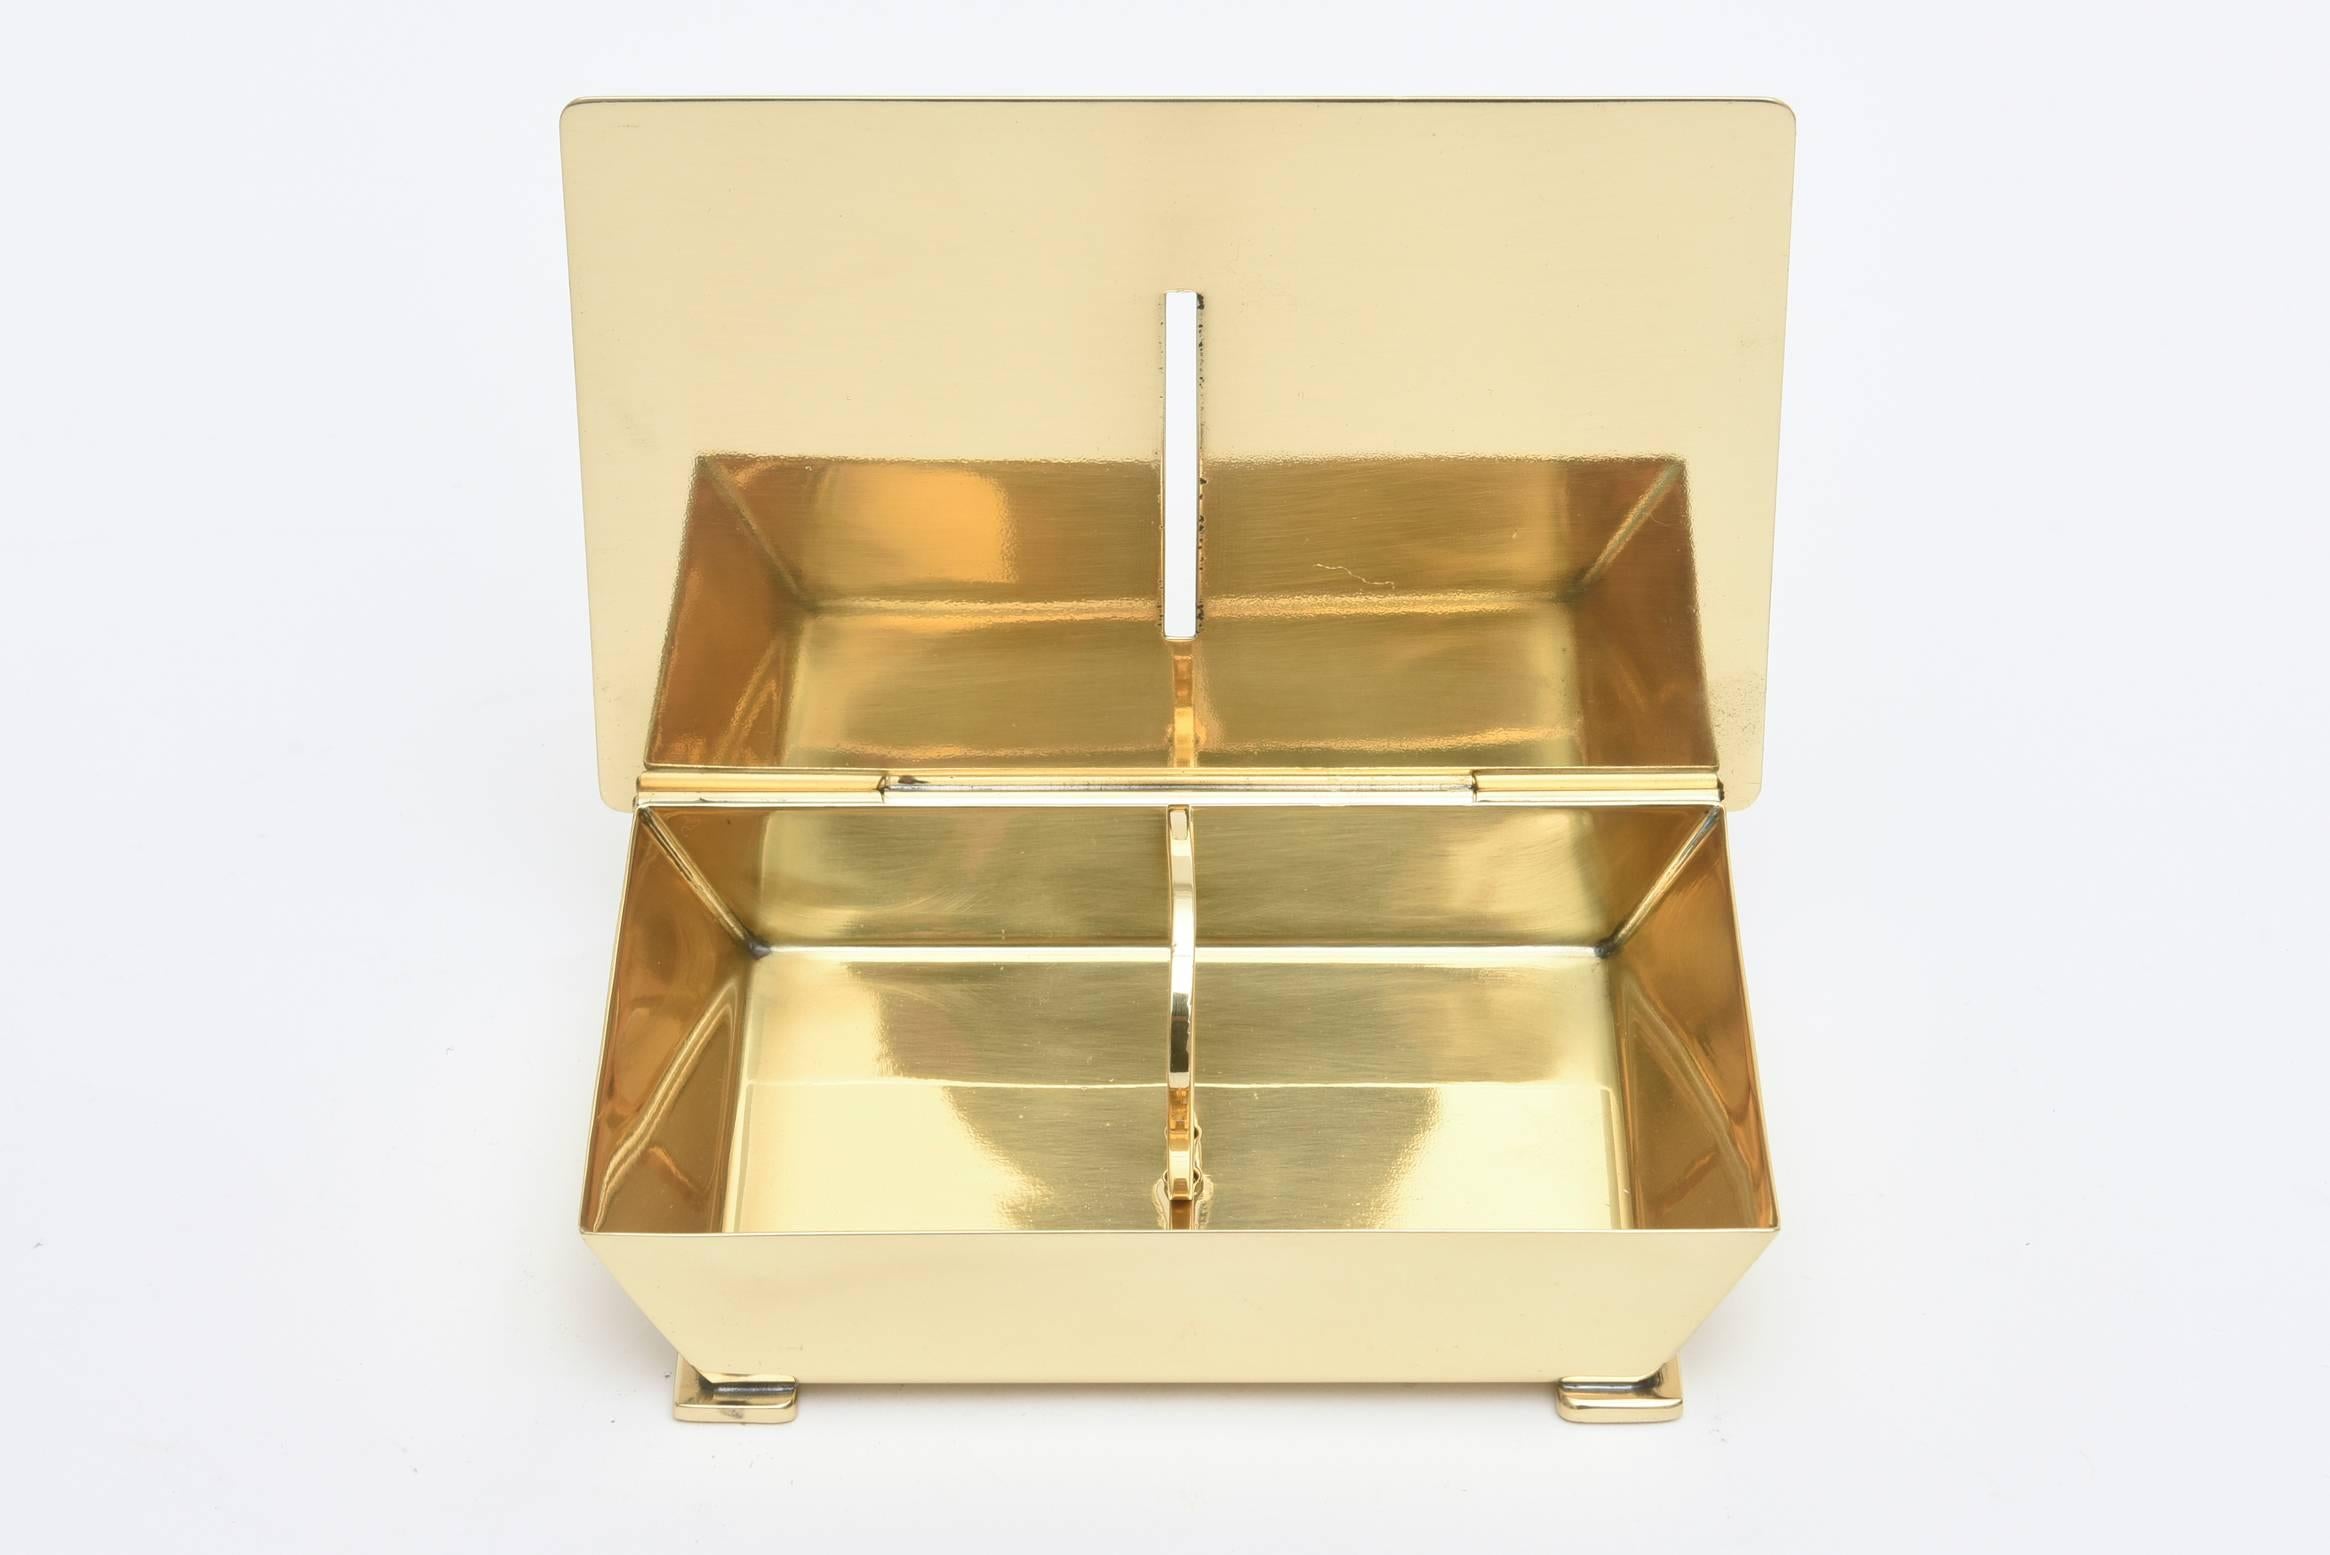 Polished Solid Brass Mid-Century Modernist Hinged Box 1